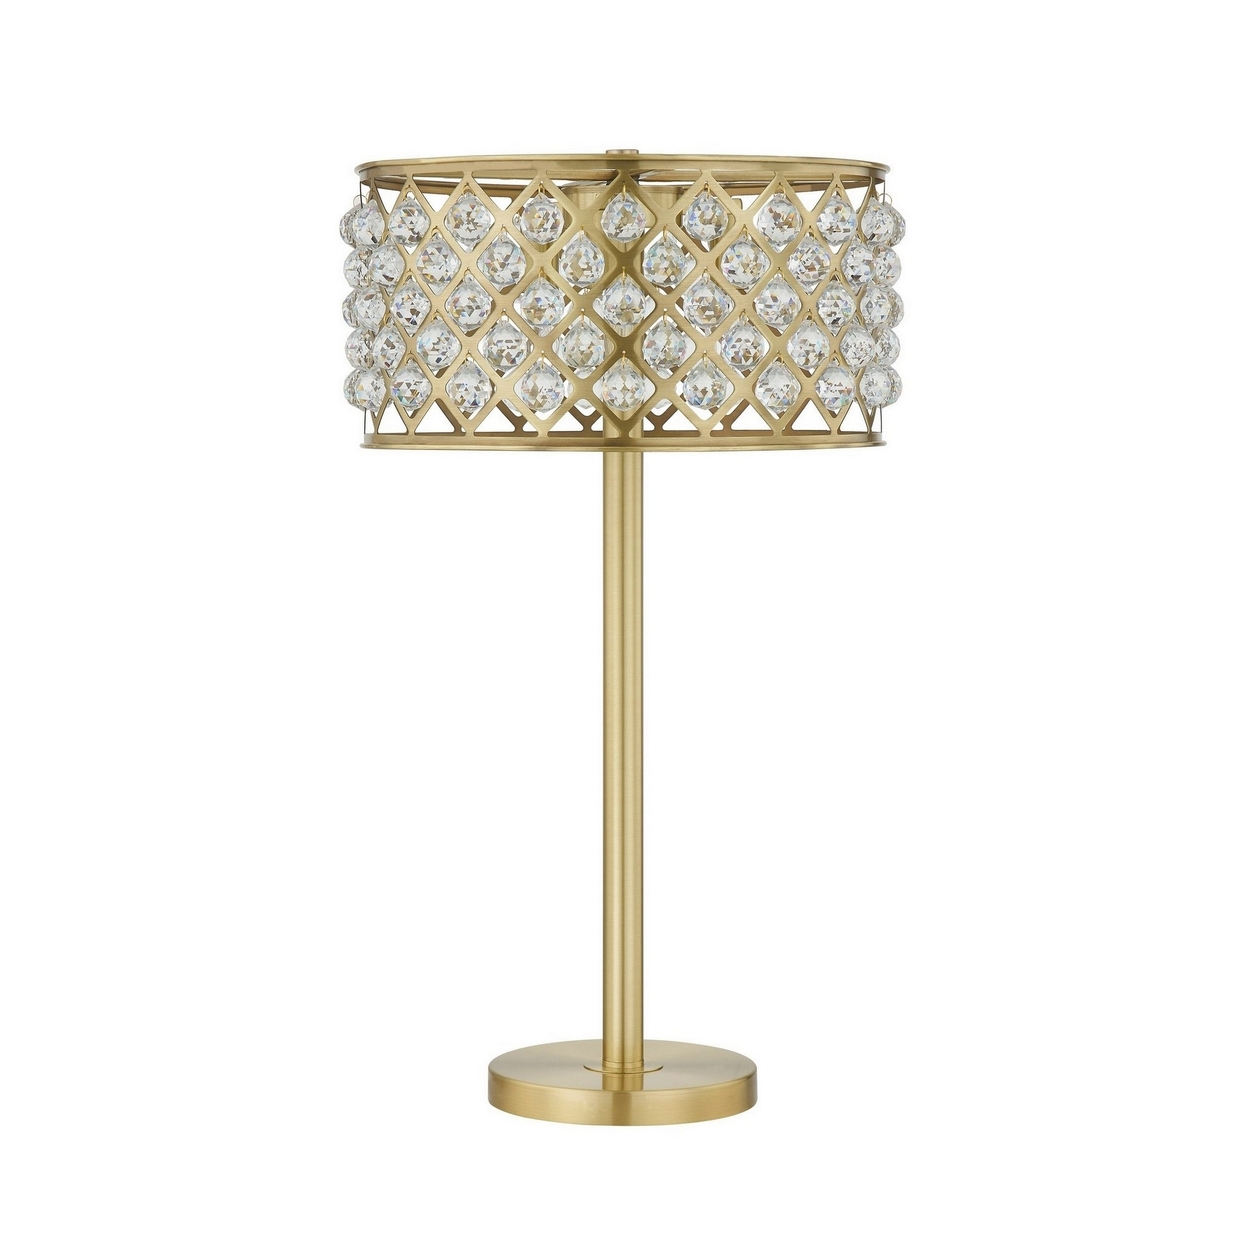 Dany 28 Inch Table Lamp With Crystal Drum Shade, Gold Brass Metal Base -Saltoro Sherpi